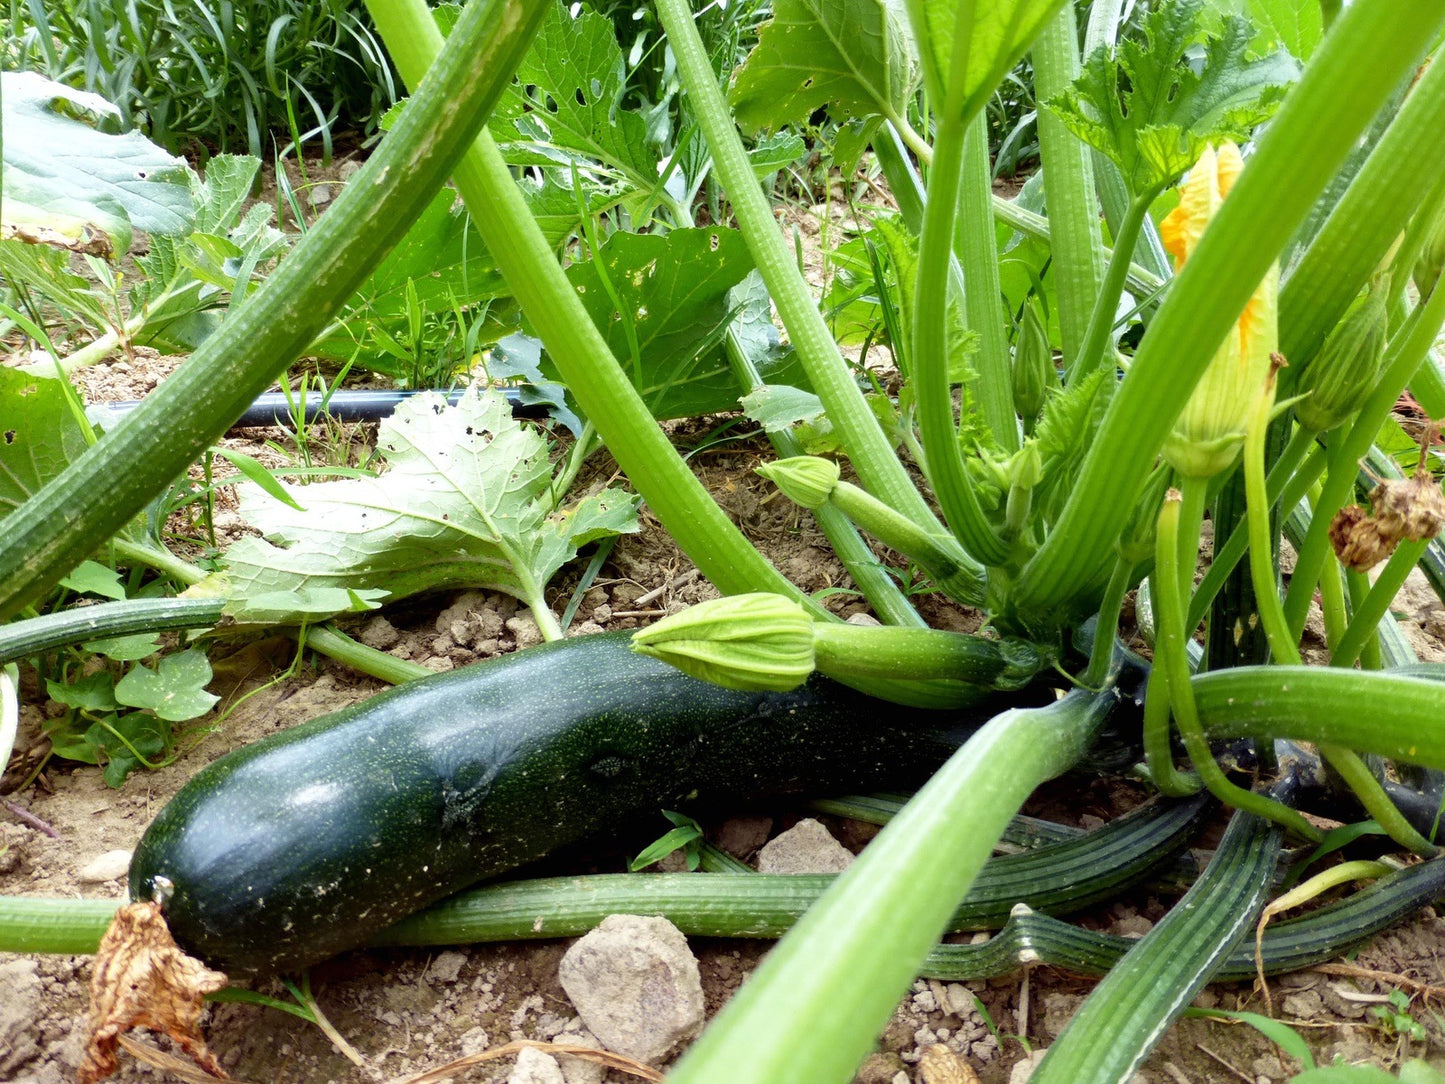 Black Beauty Summer Squash, 25 Heirloom Seeds Per Packet, Non GMO Seeds